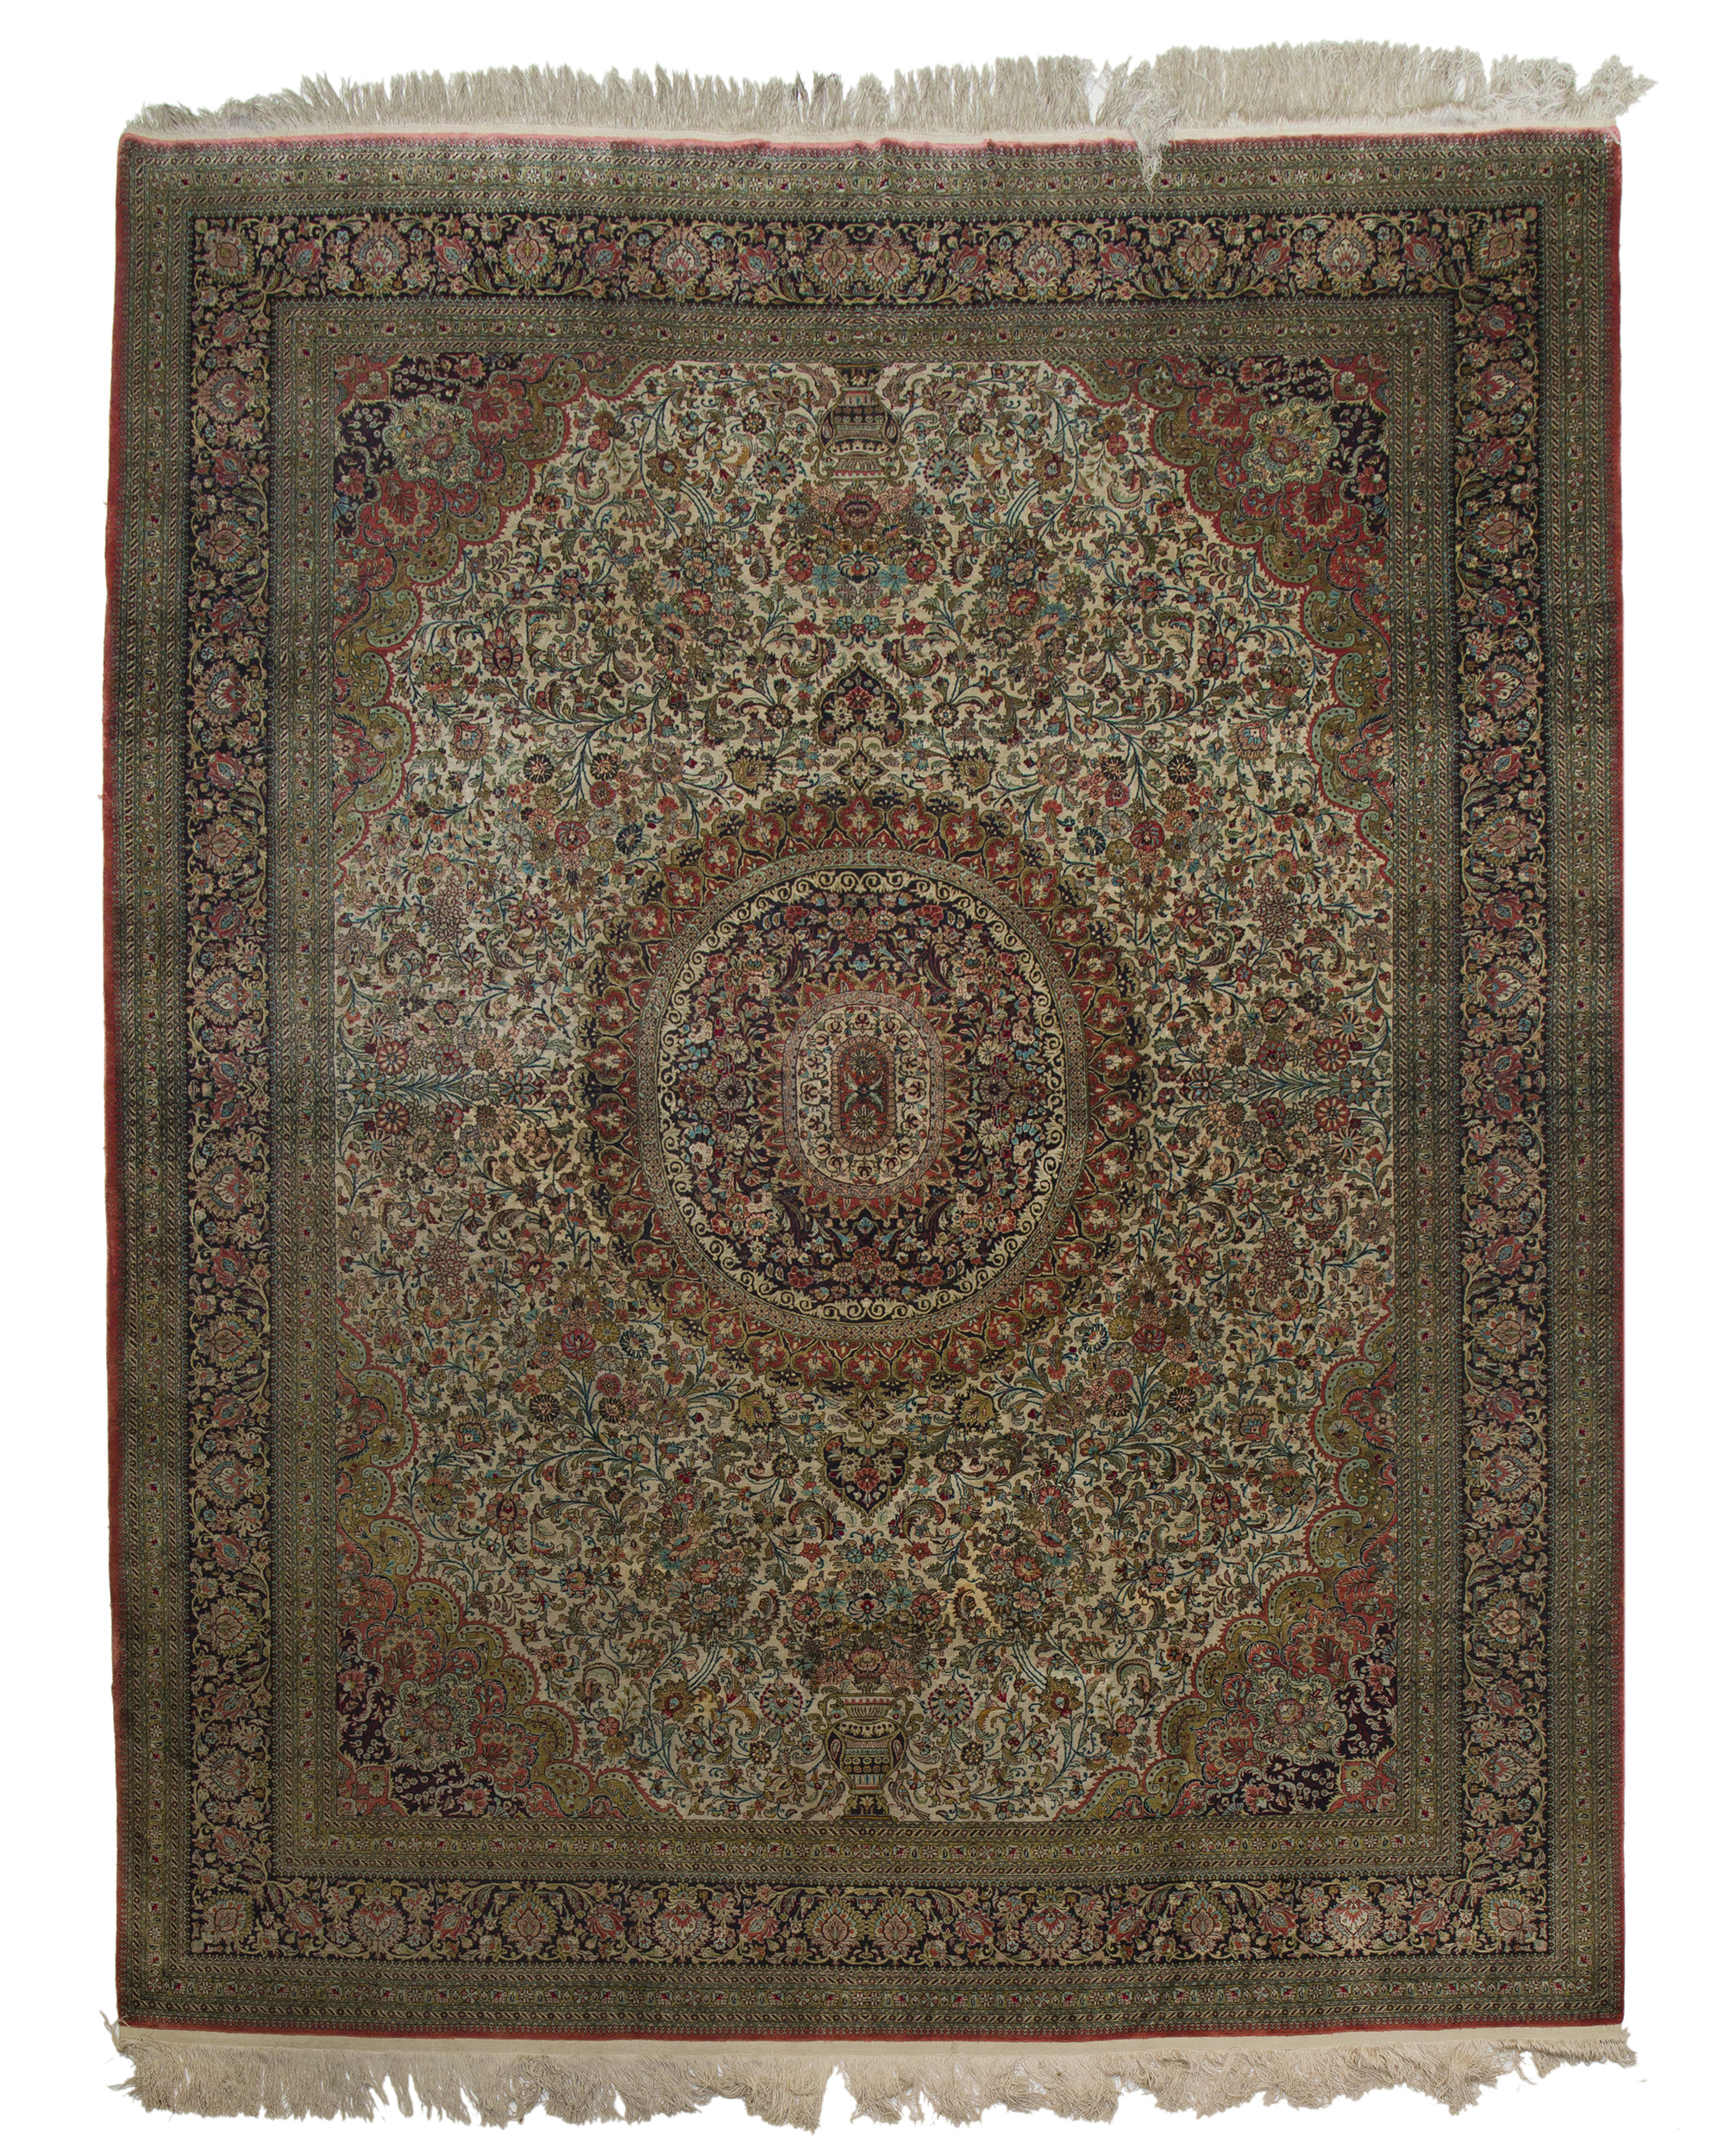 A large Persian area rug